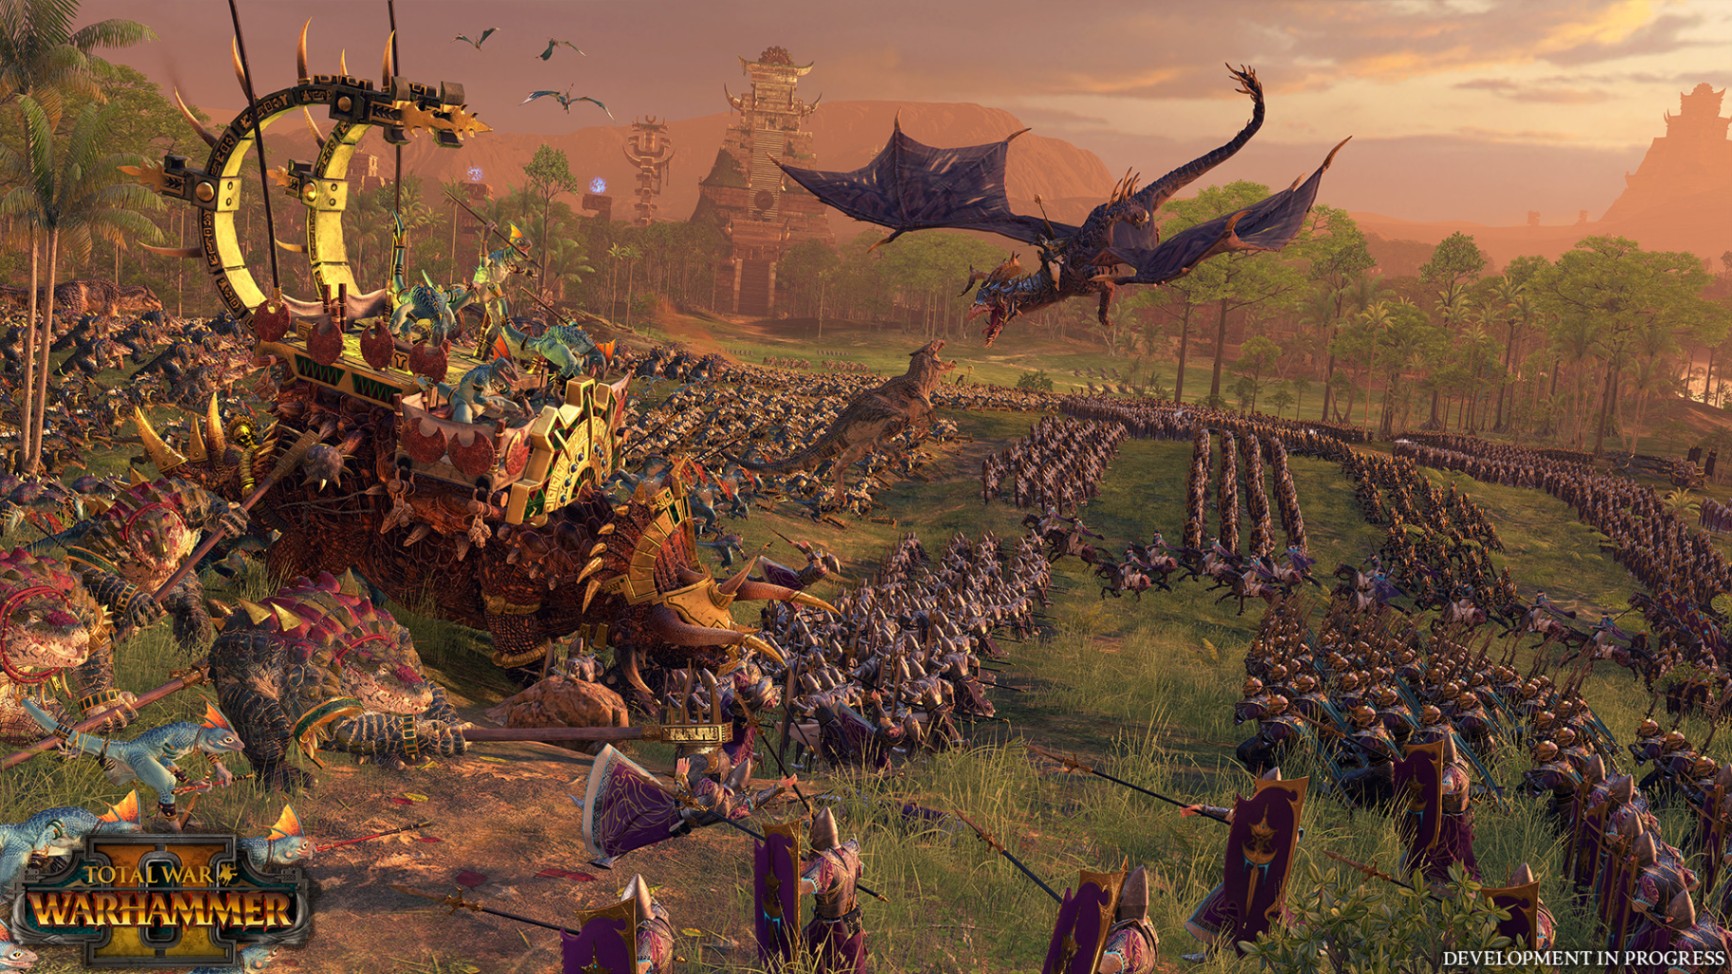 The Best Tips to Get Started in Total War: Warhammer 2